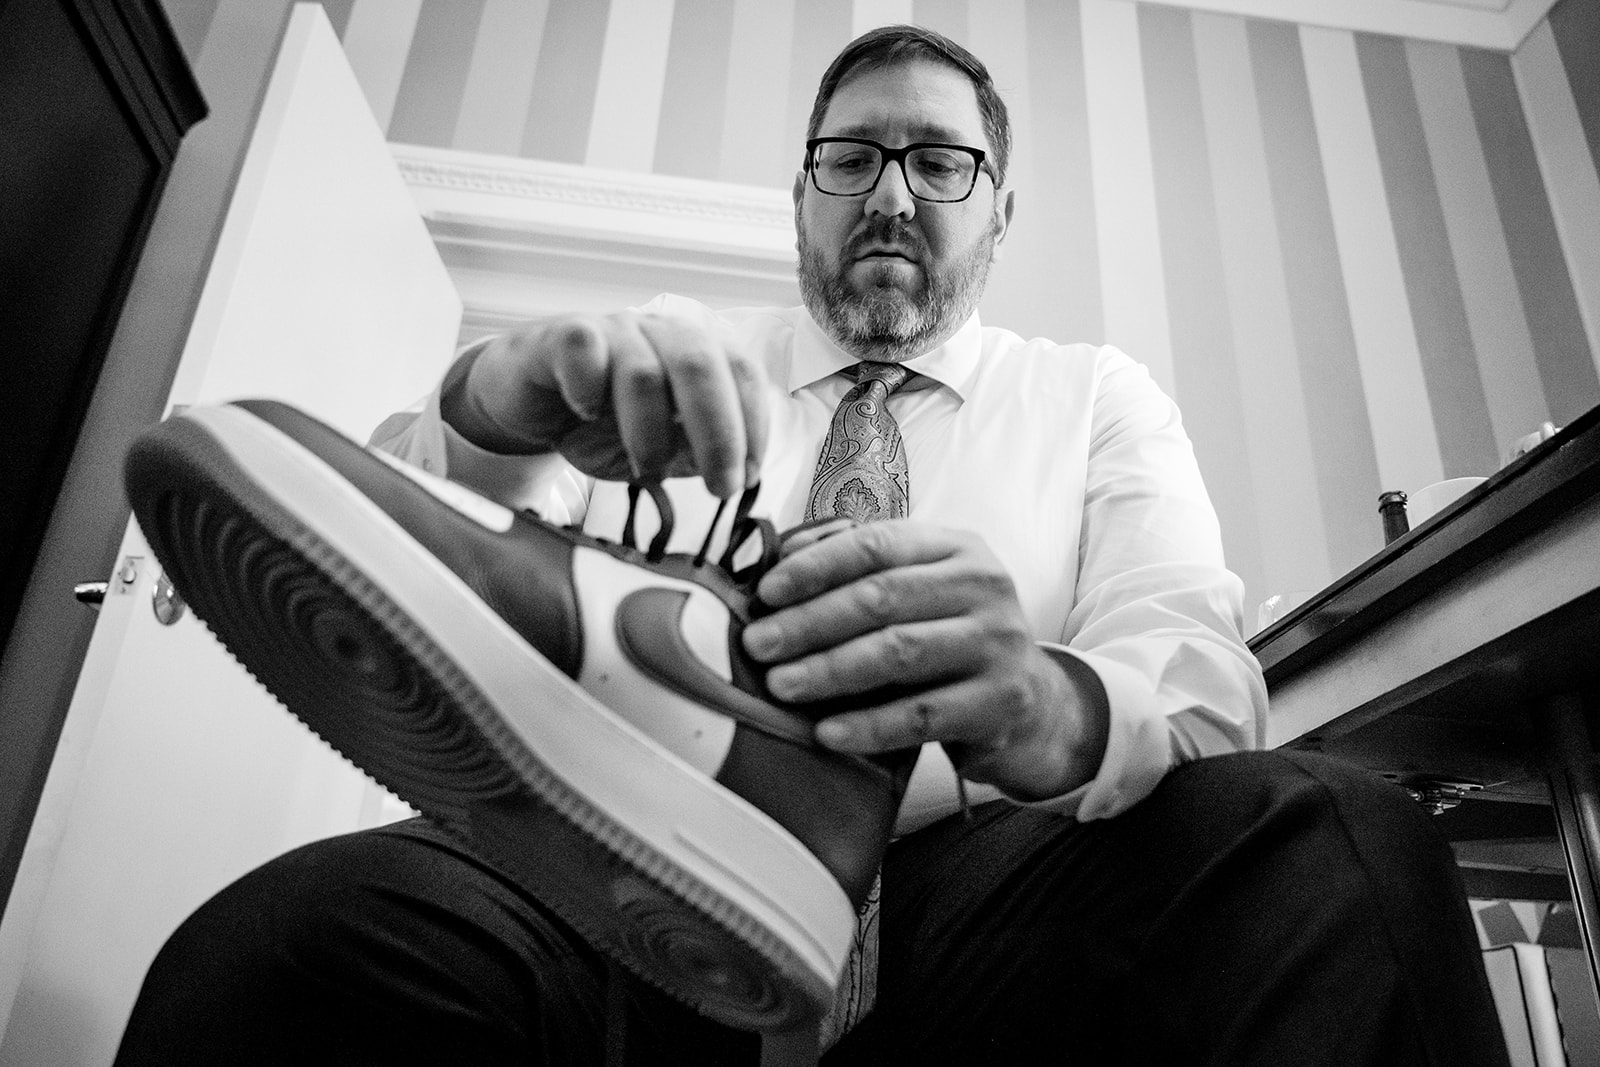 Groom getting ready at Hotel Monaco in Washington DC before the wedding ceremony by Potok's World Photography